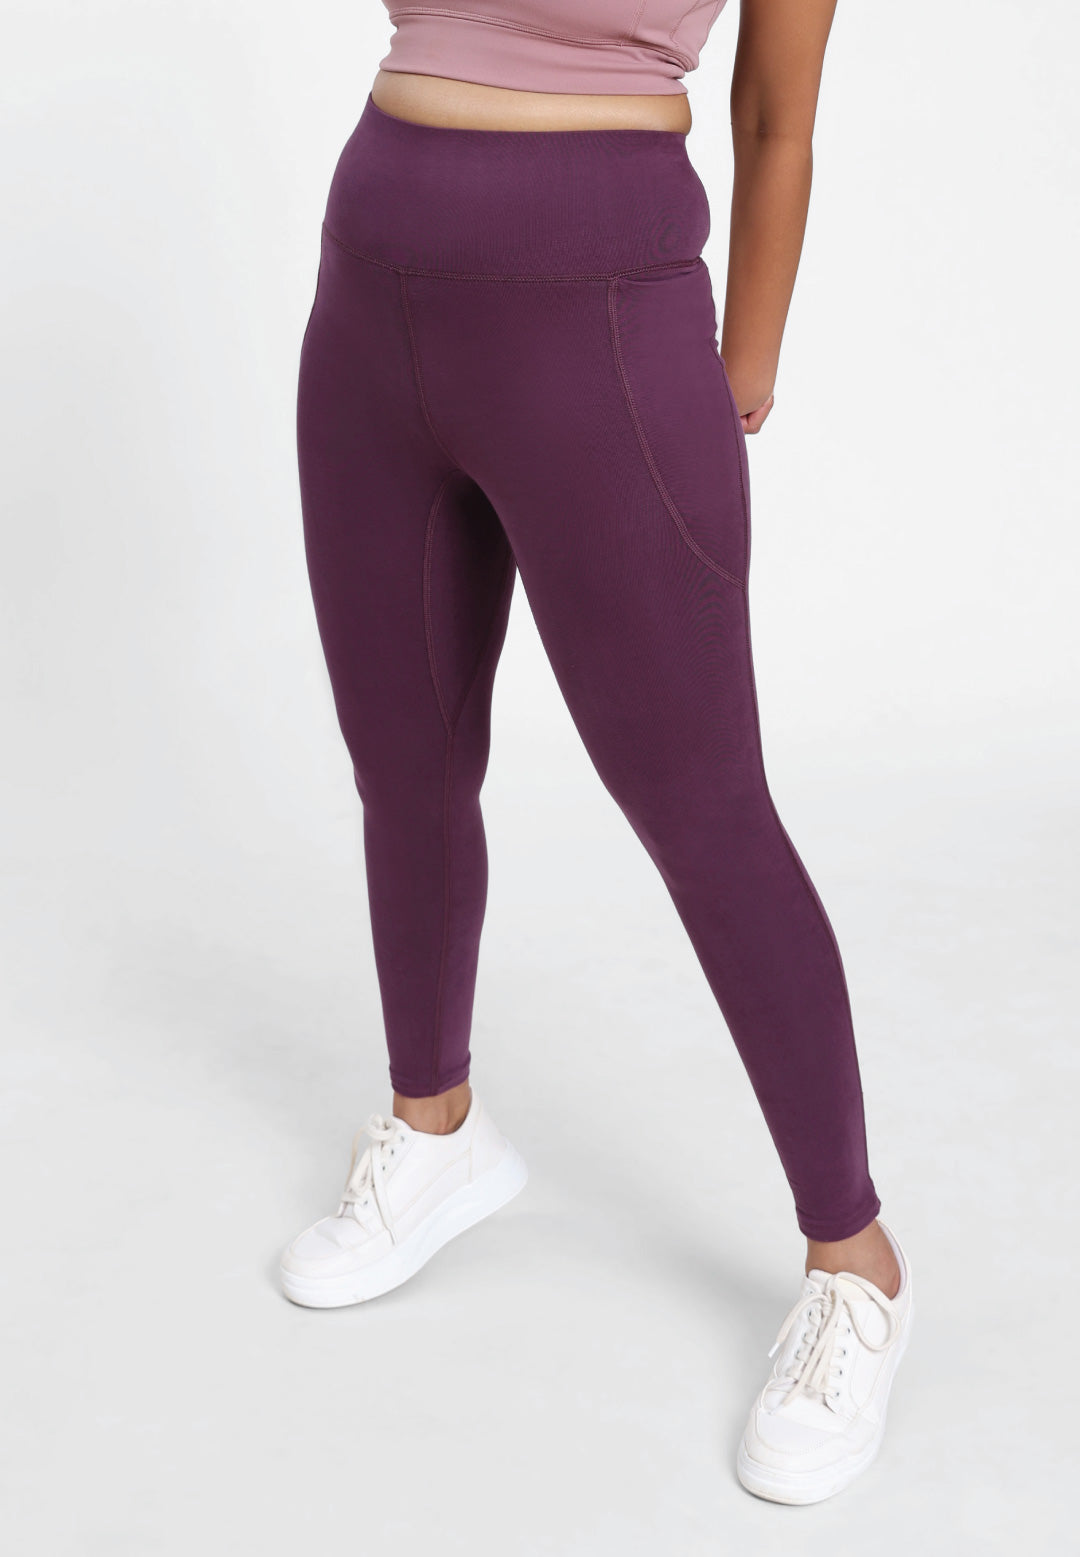 Buy Bliss Club Women Lavender Groove-In Cotton Leggings with